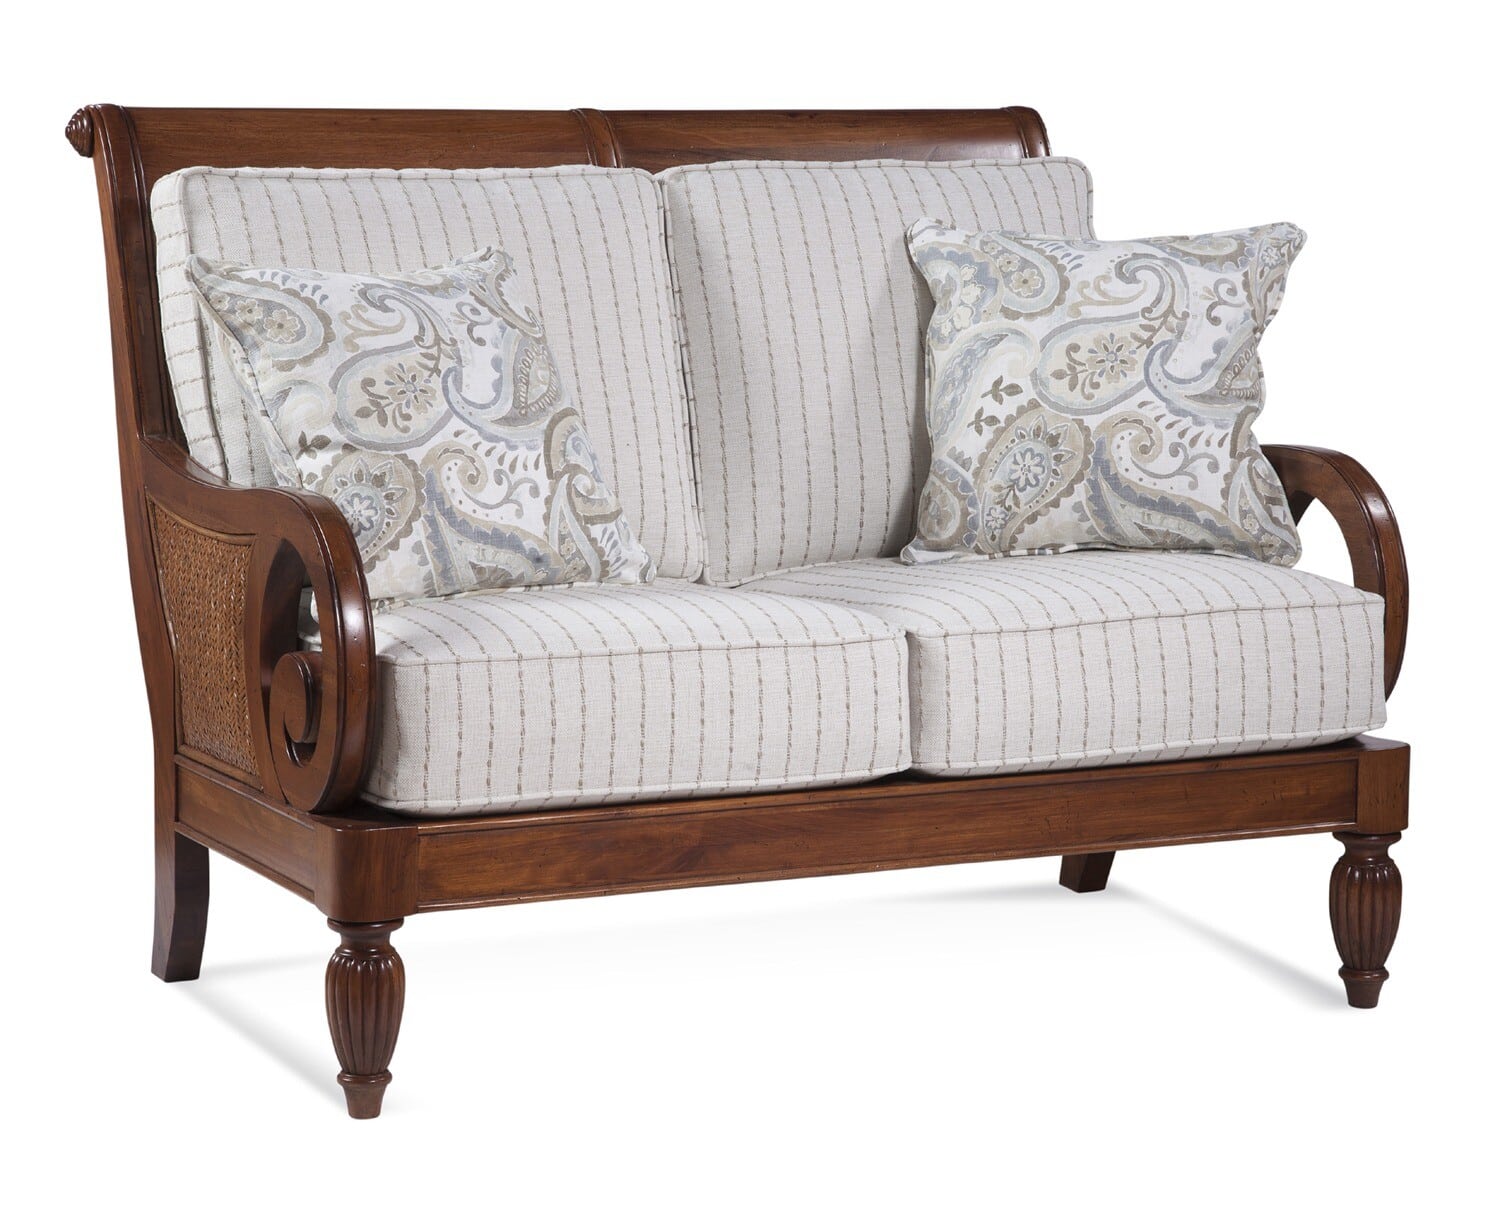 Grand View Solid Wood and Wicker Loveseat Model 934-019 by Braxton Culler